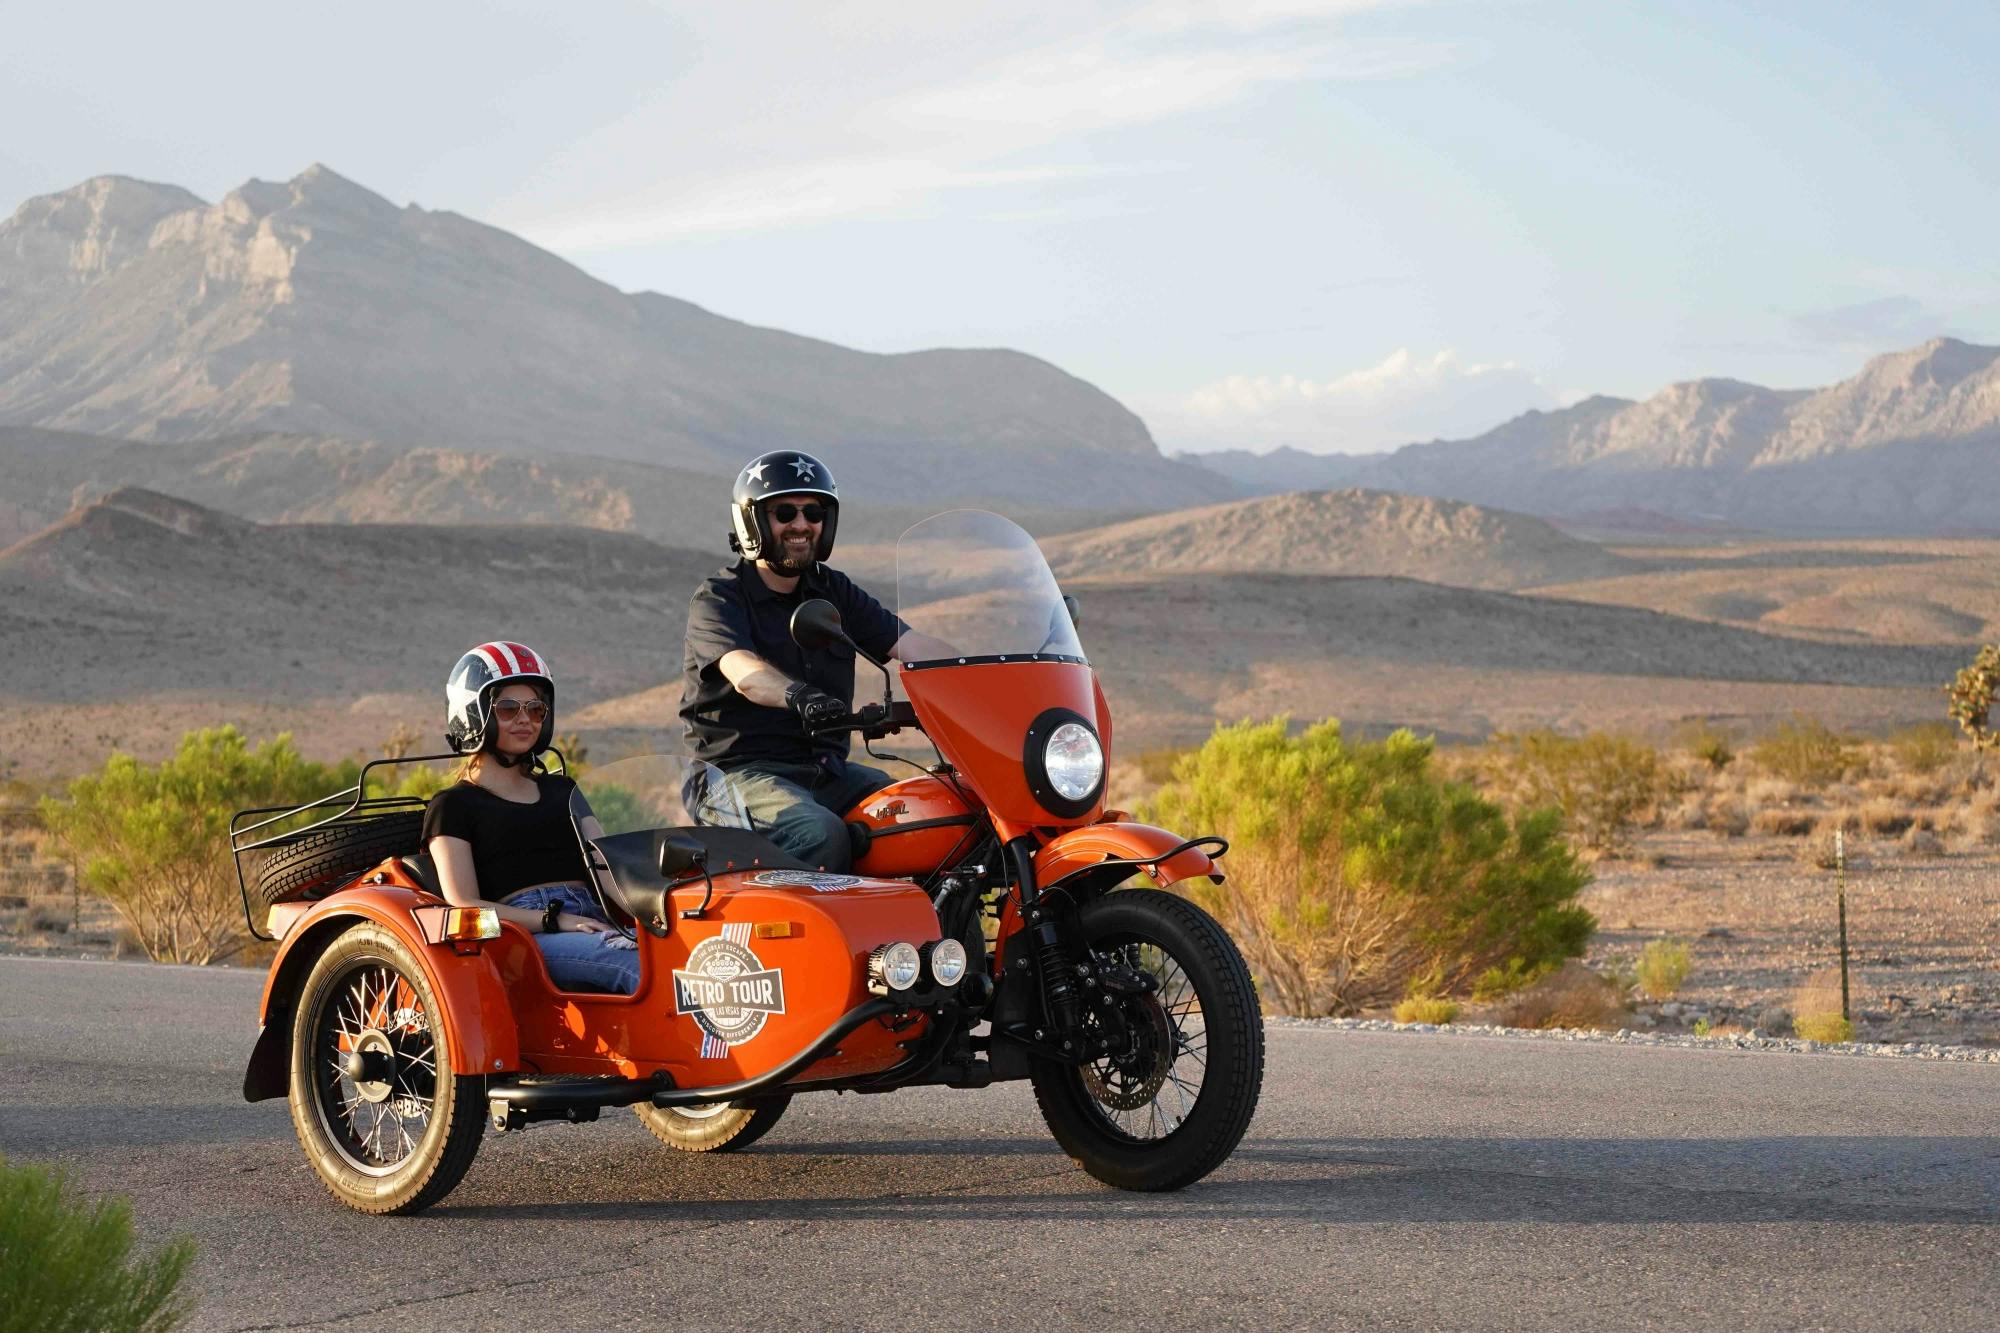 Valley of Fire and Lake Mead full day sidecar tour from Las Vegas